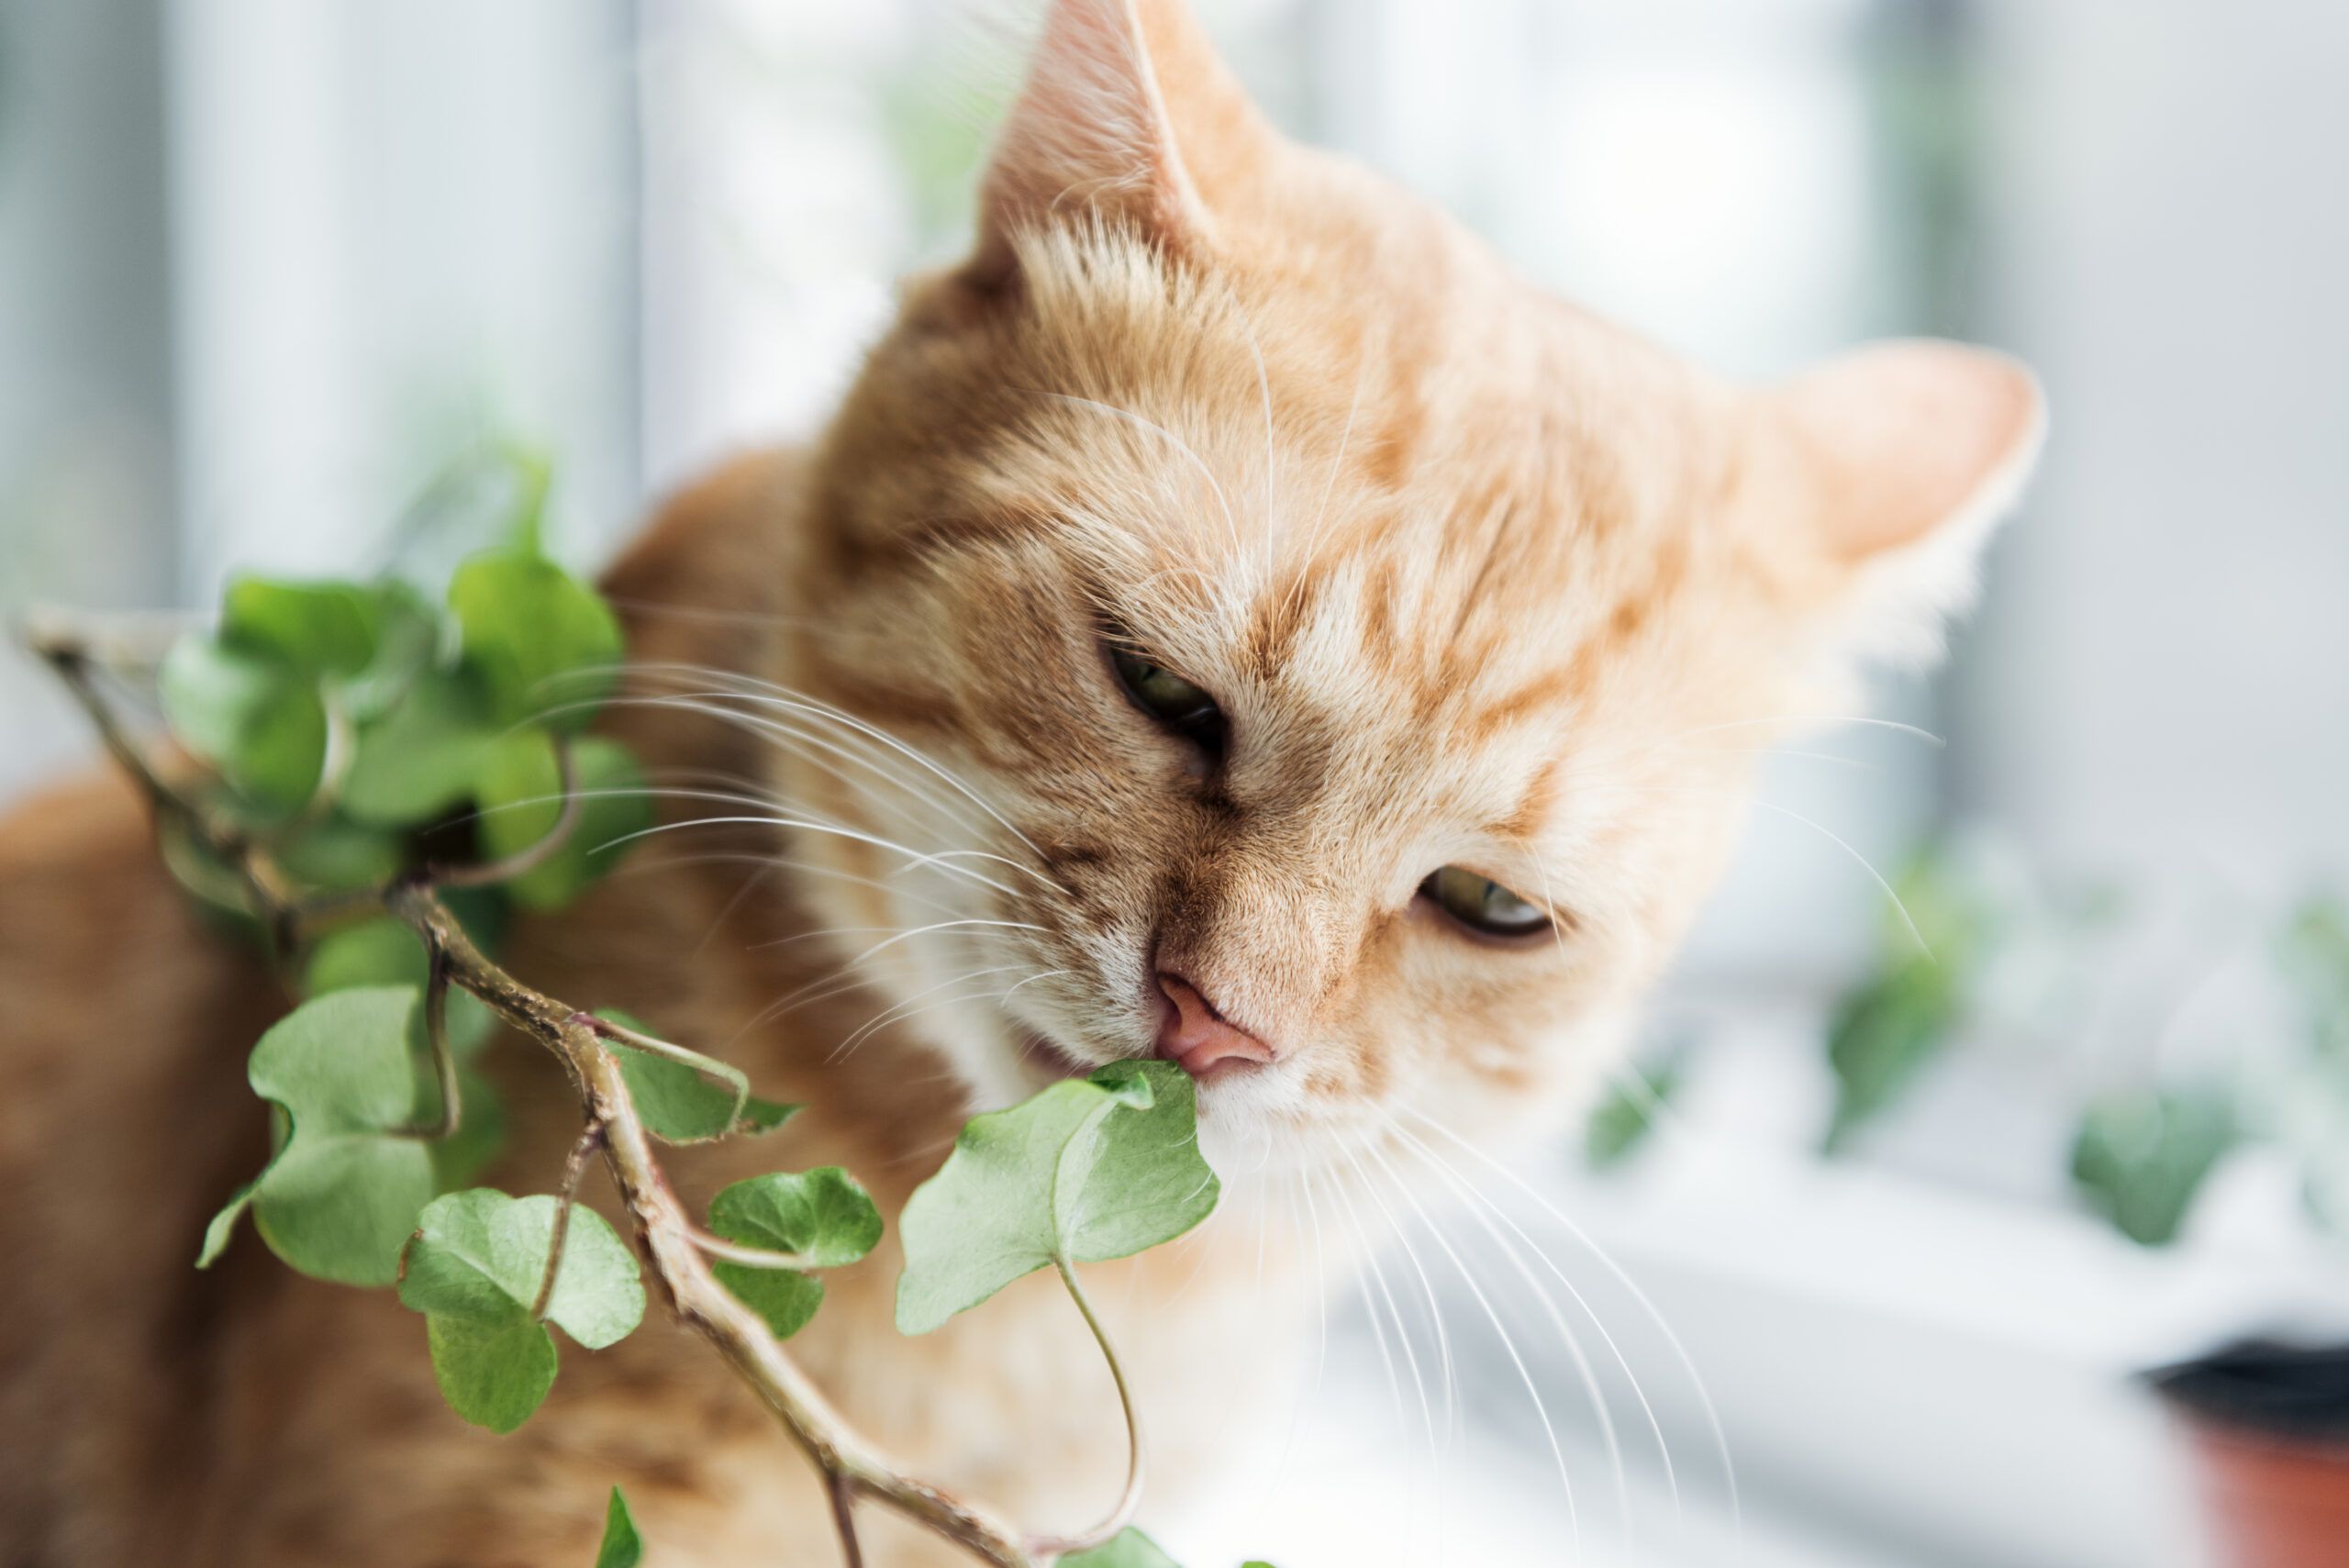 Cat eating plant